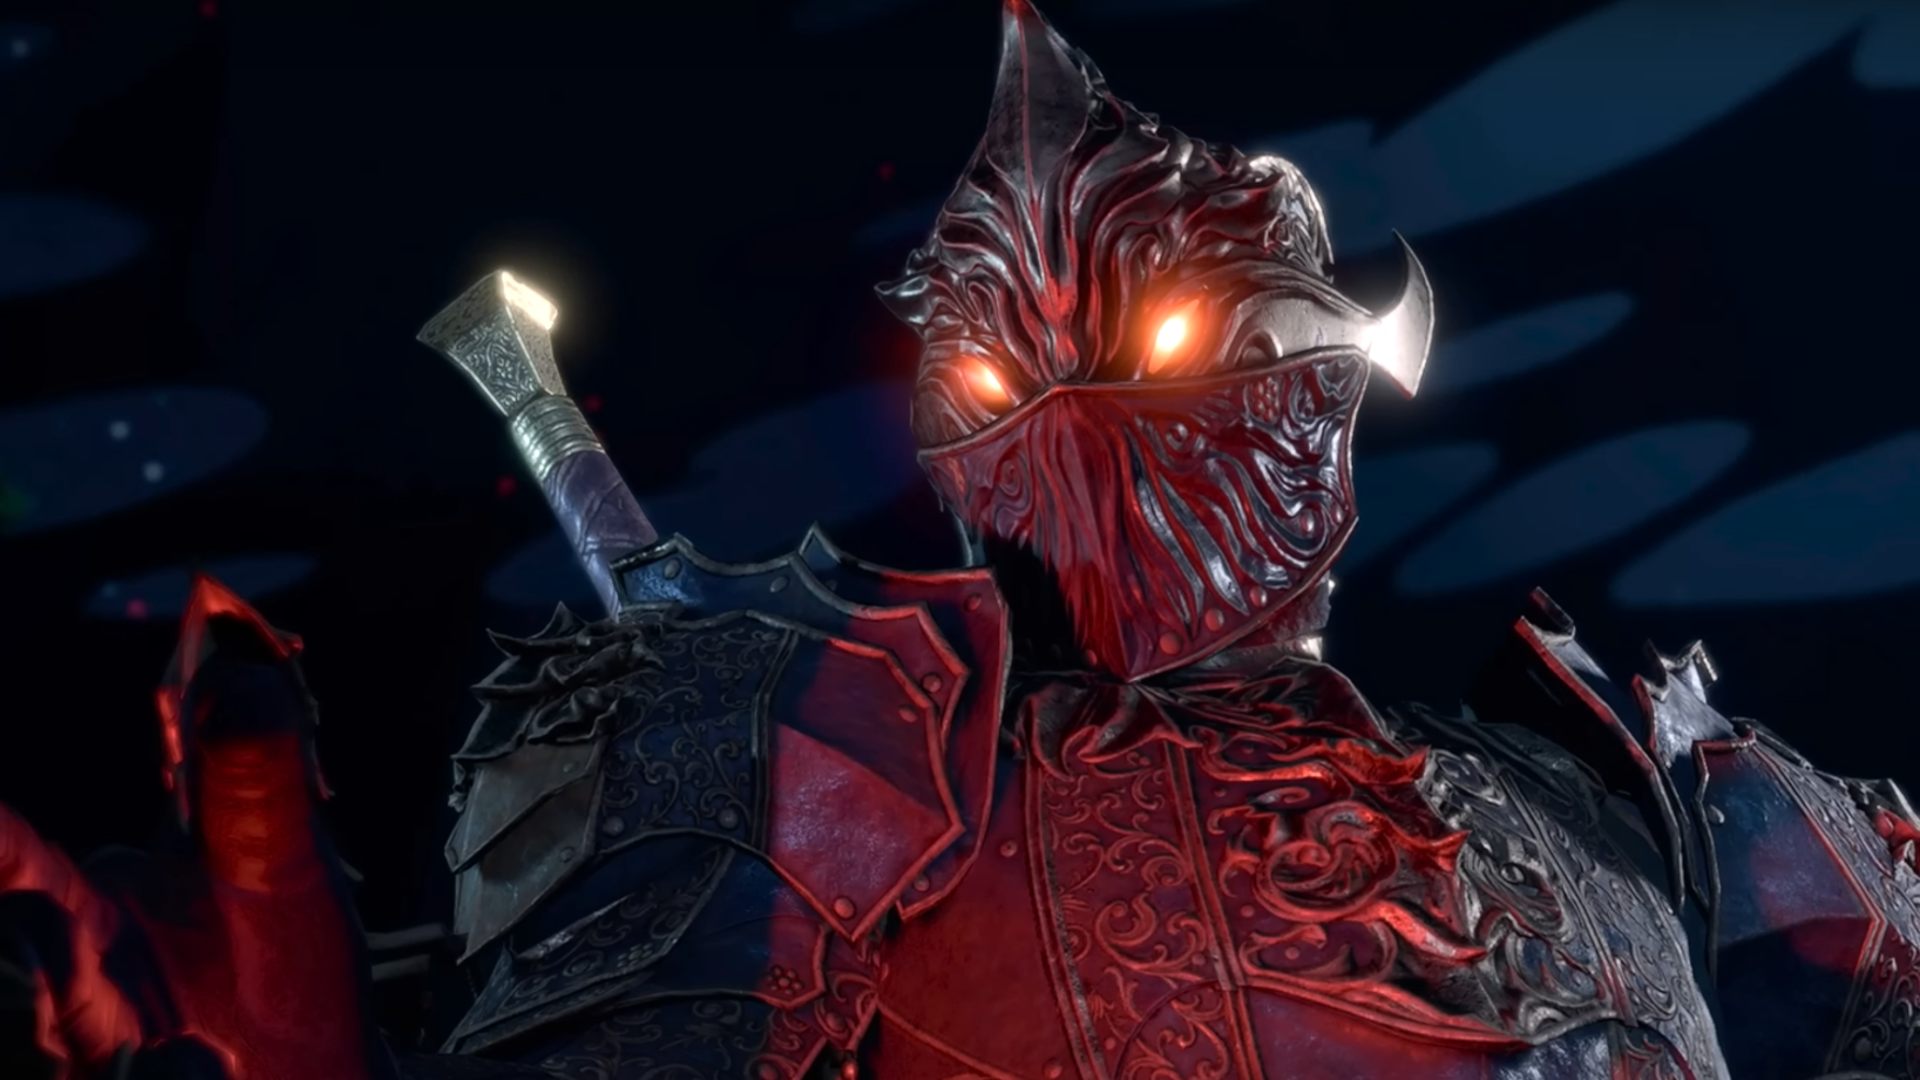 Baldur's Gate 3 release date, trailers, gameplay, and story